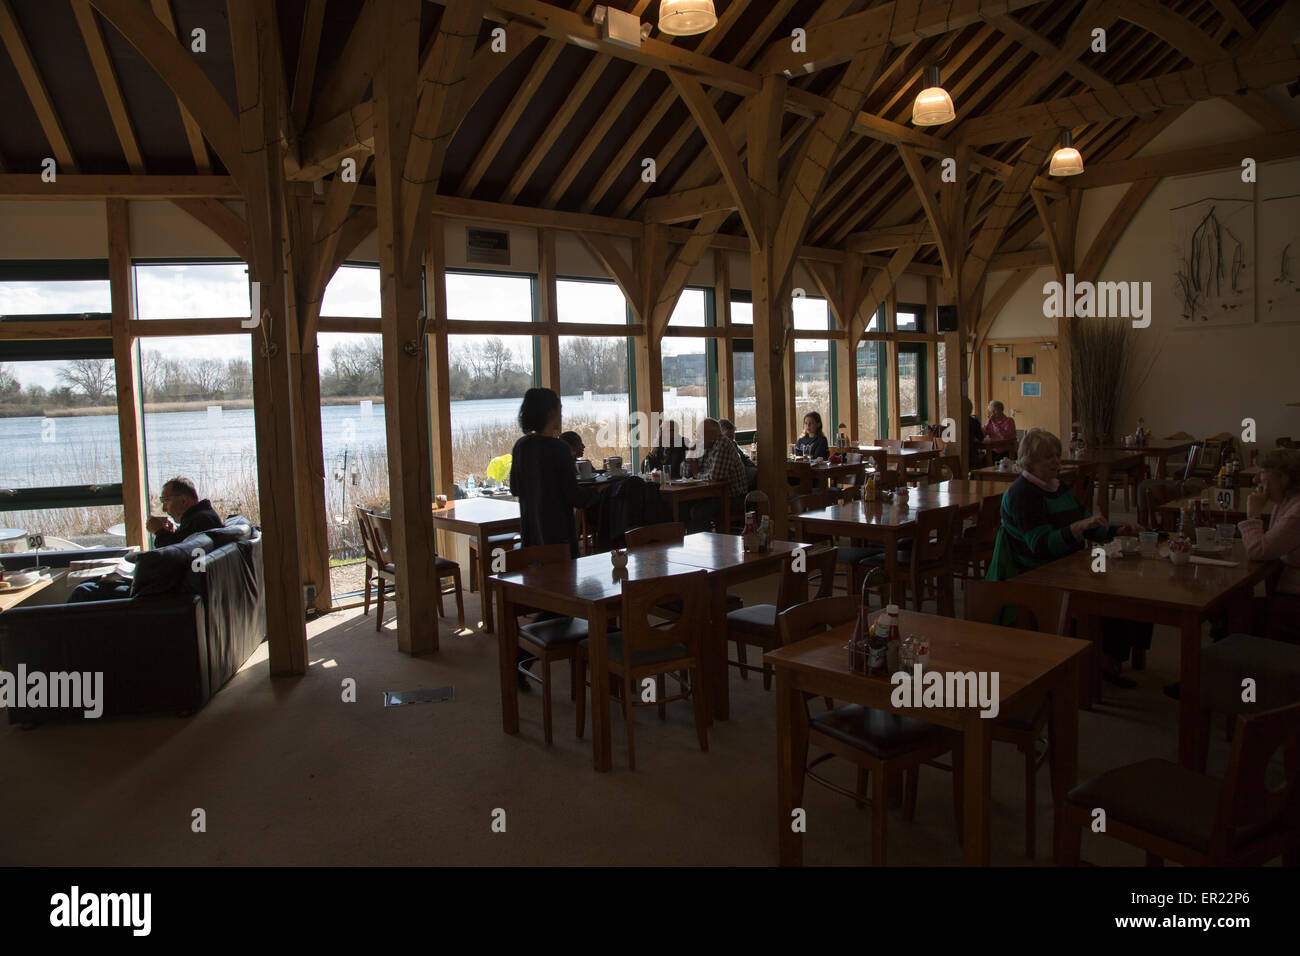 Cafe at Cotswold water park, Cerney Wick, Cirencester, Gloucestershire, England, UK Stock Photo